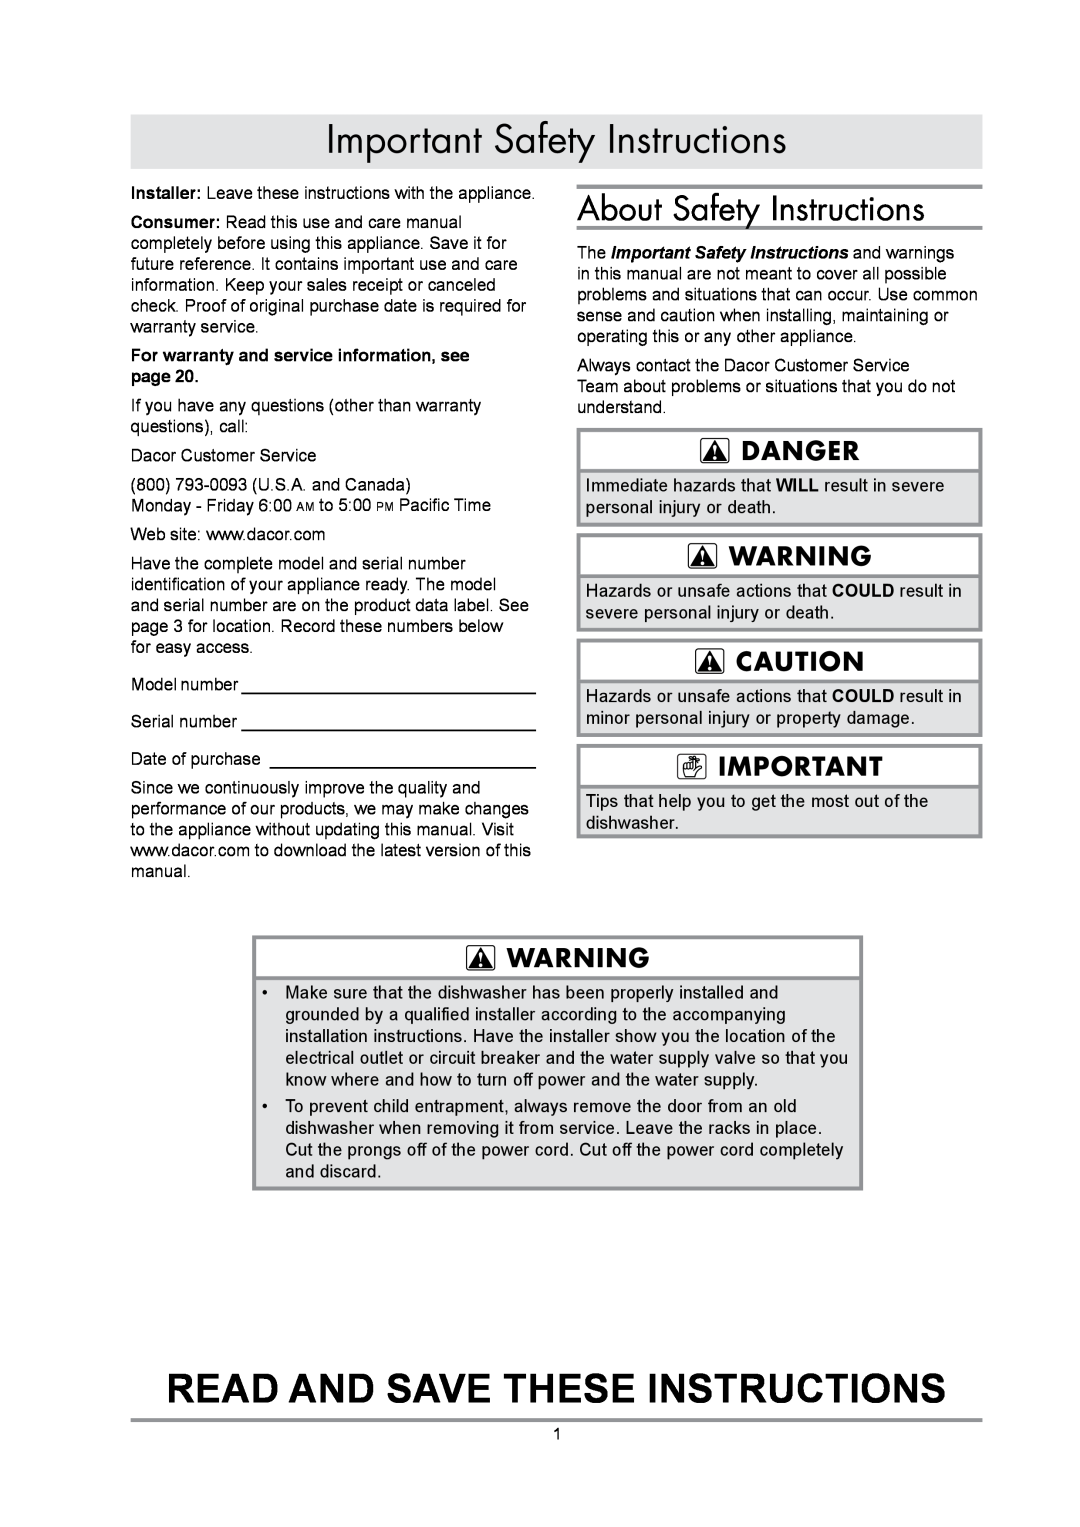 Dacor renaissance built-in dishwasher manual Read And Save These Instructions, Important Safety Instructions, danger 